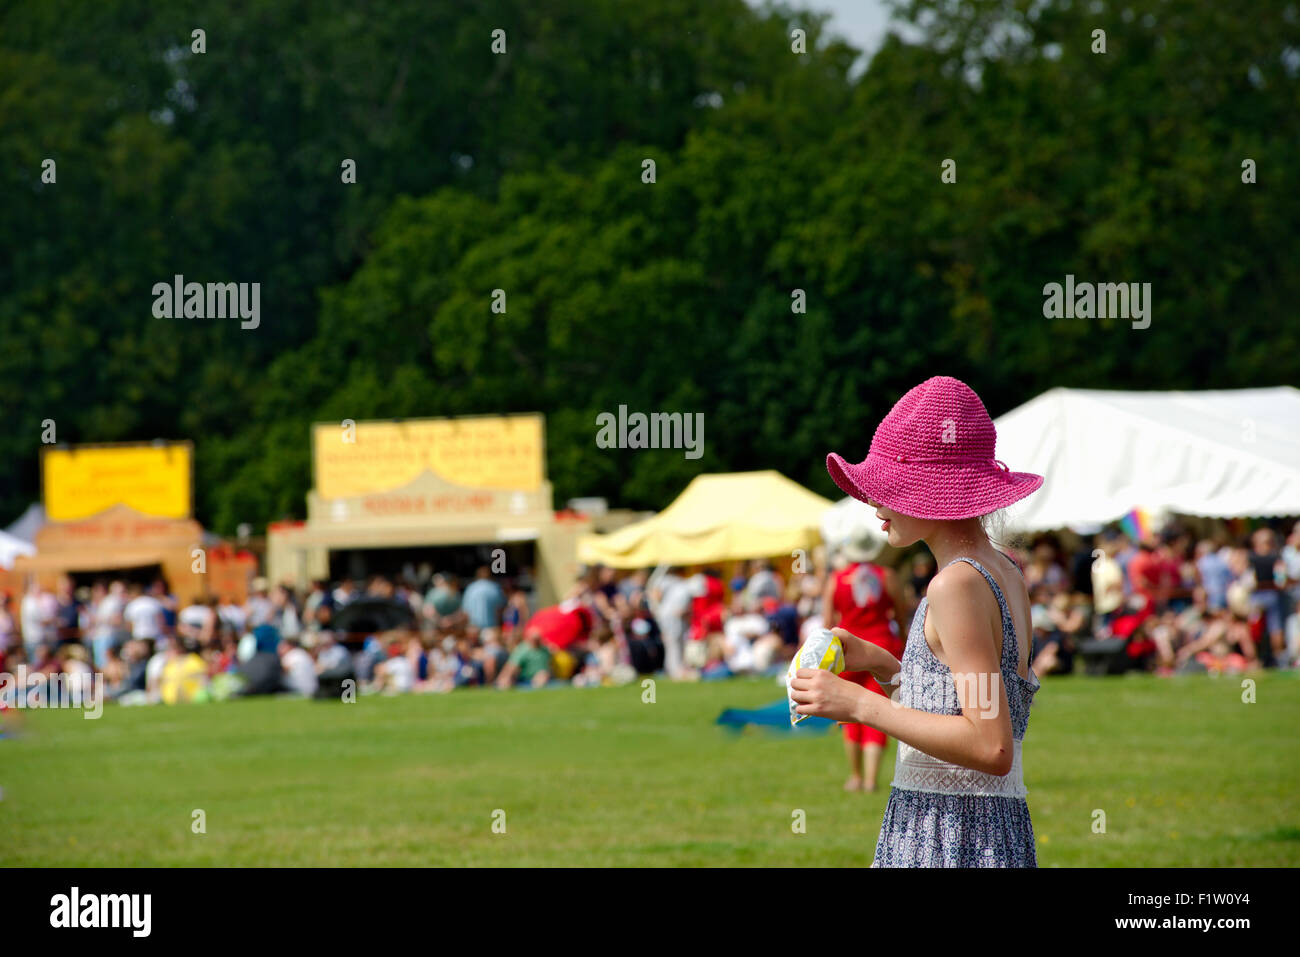 Young girl at festival with pink sun hat Stock Photo